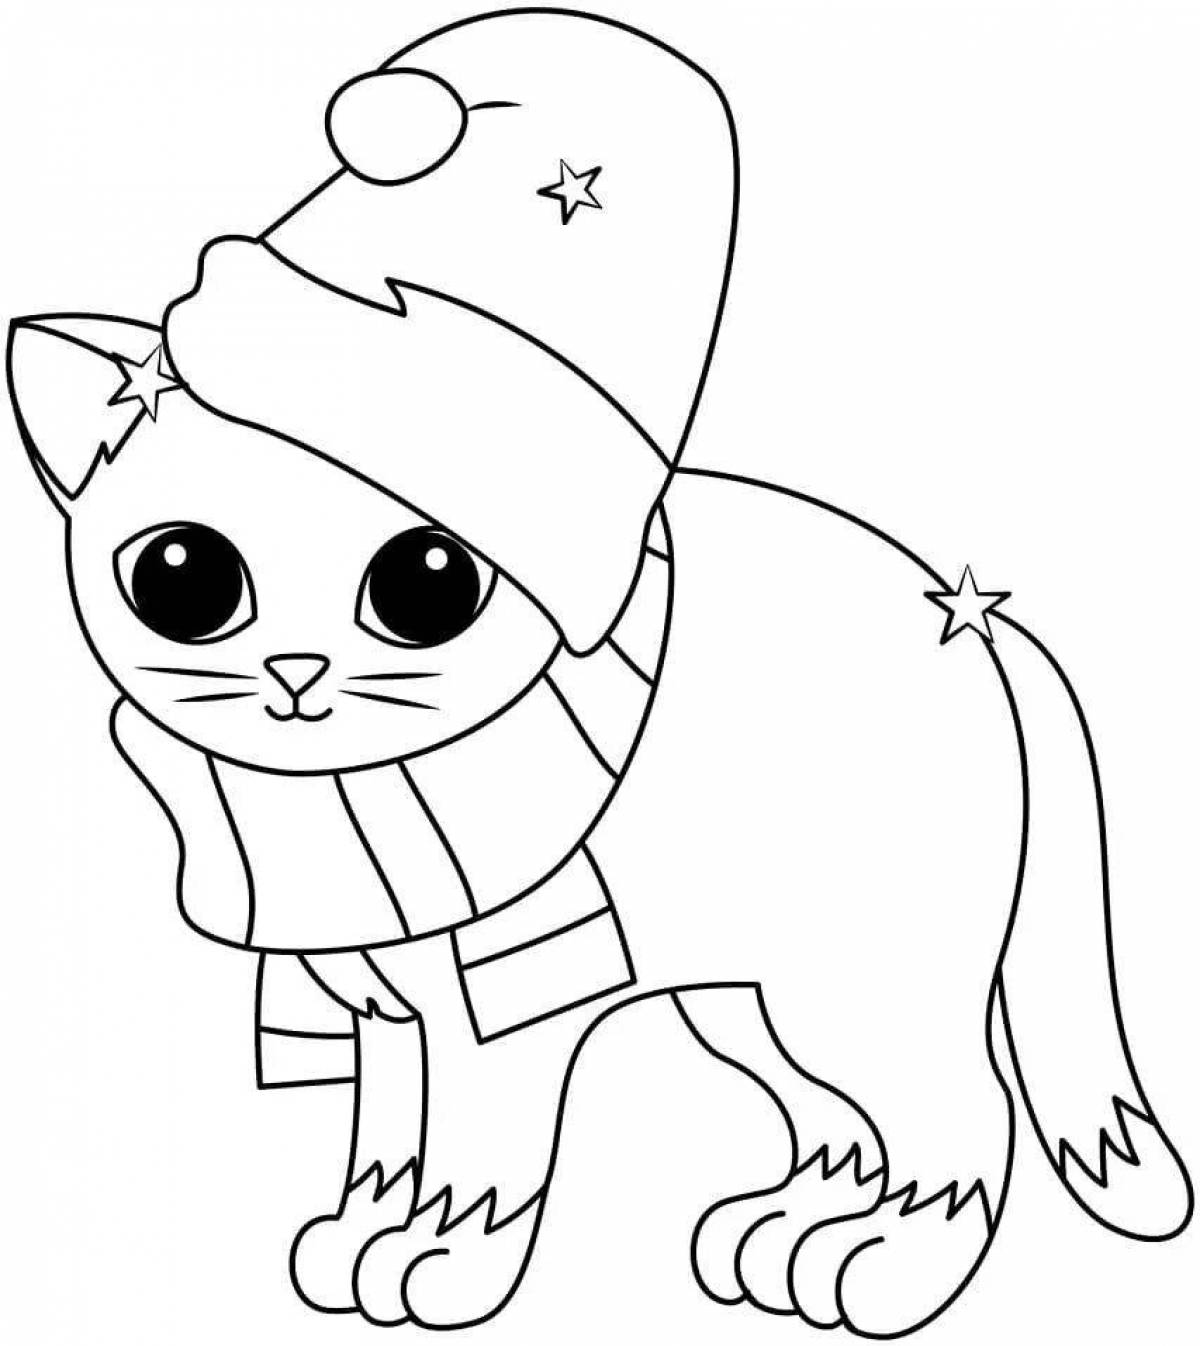 Coloring book bright cat in a hat